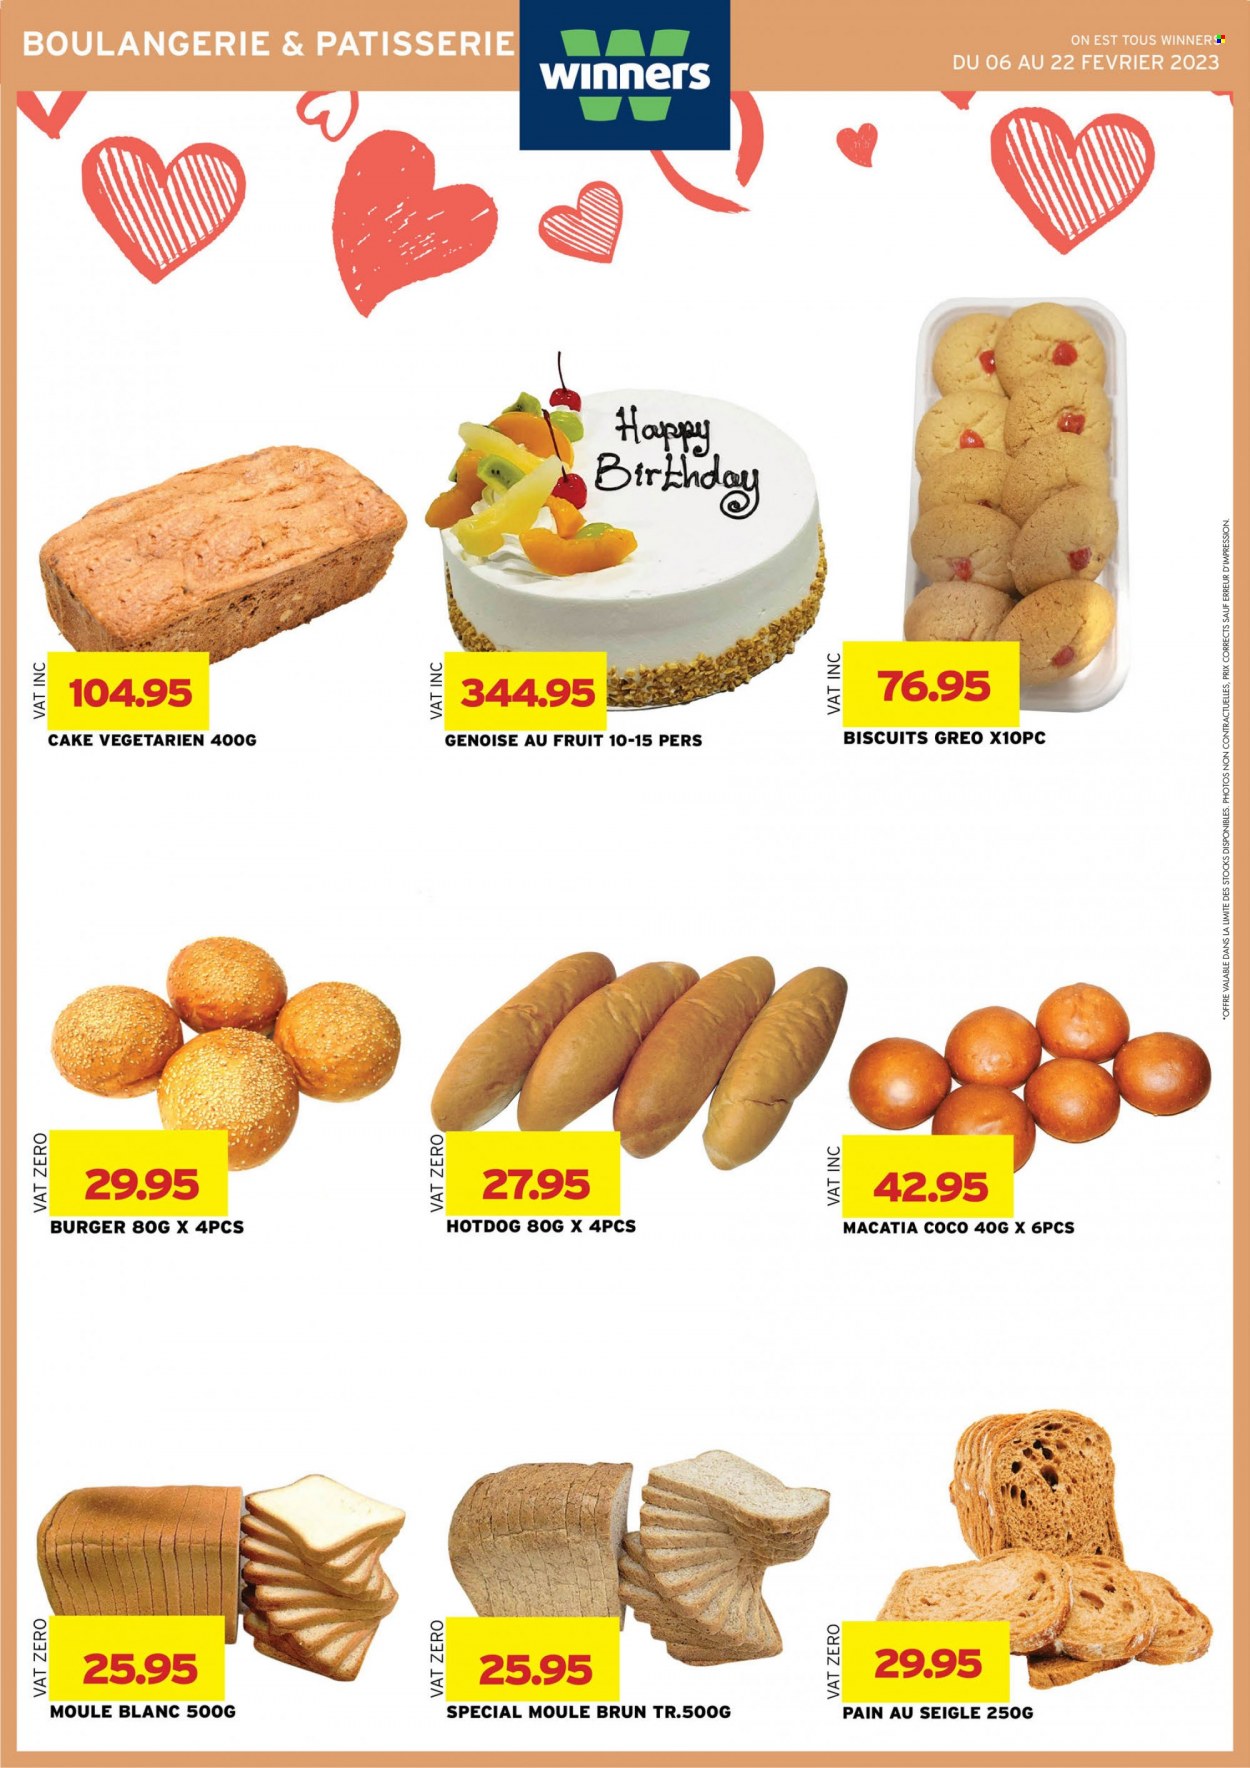 thumbnail - Winner's Catalogue - 6.02.2023 - 22.02.2023 - Sales products - hot dog rolls, cake, hot dog, hamburger, biscuit. Page 5.